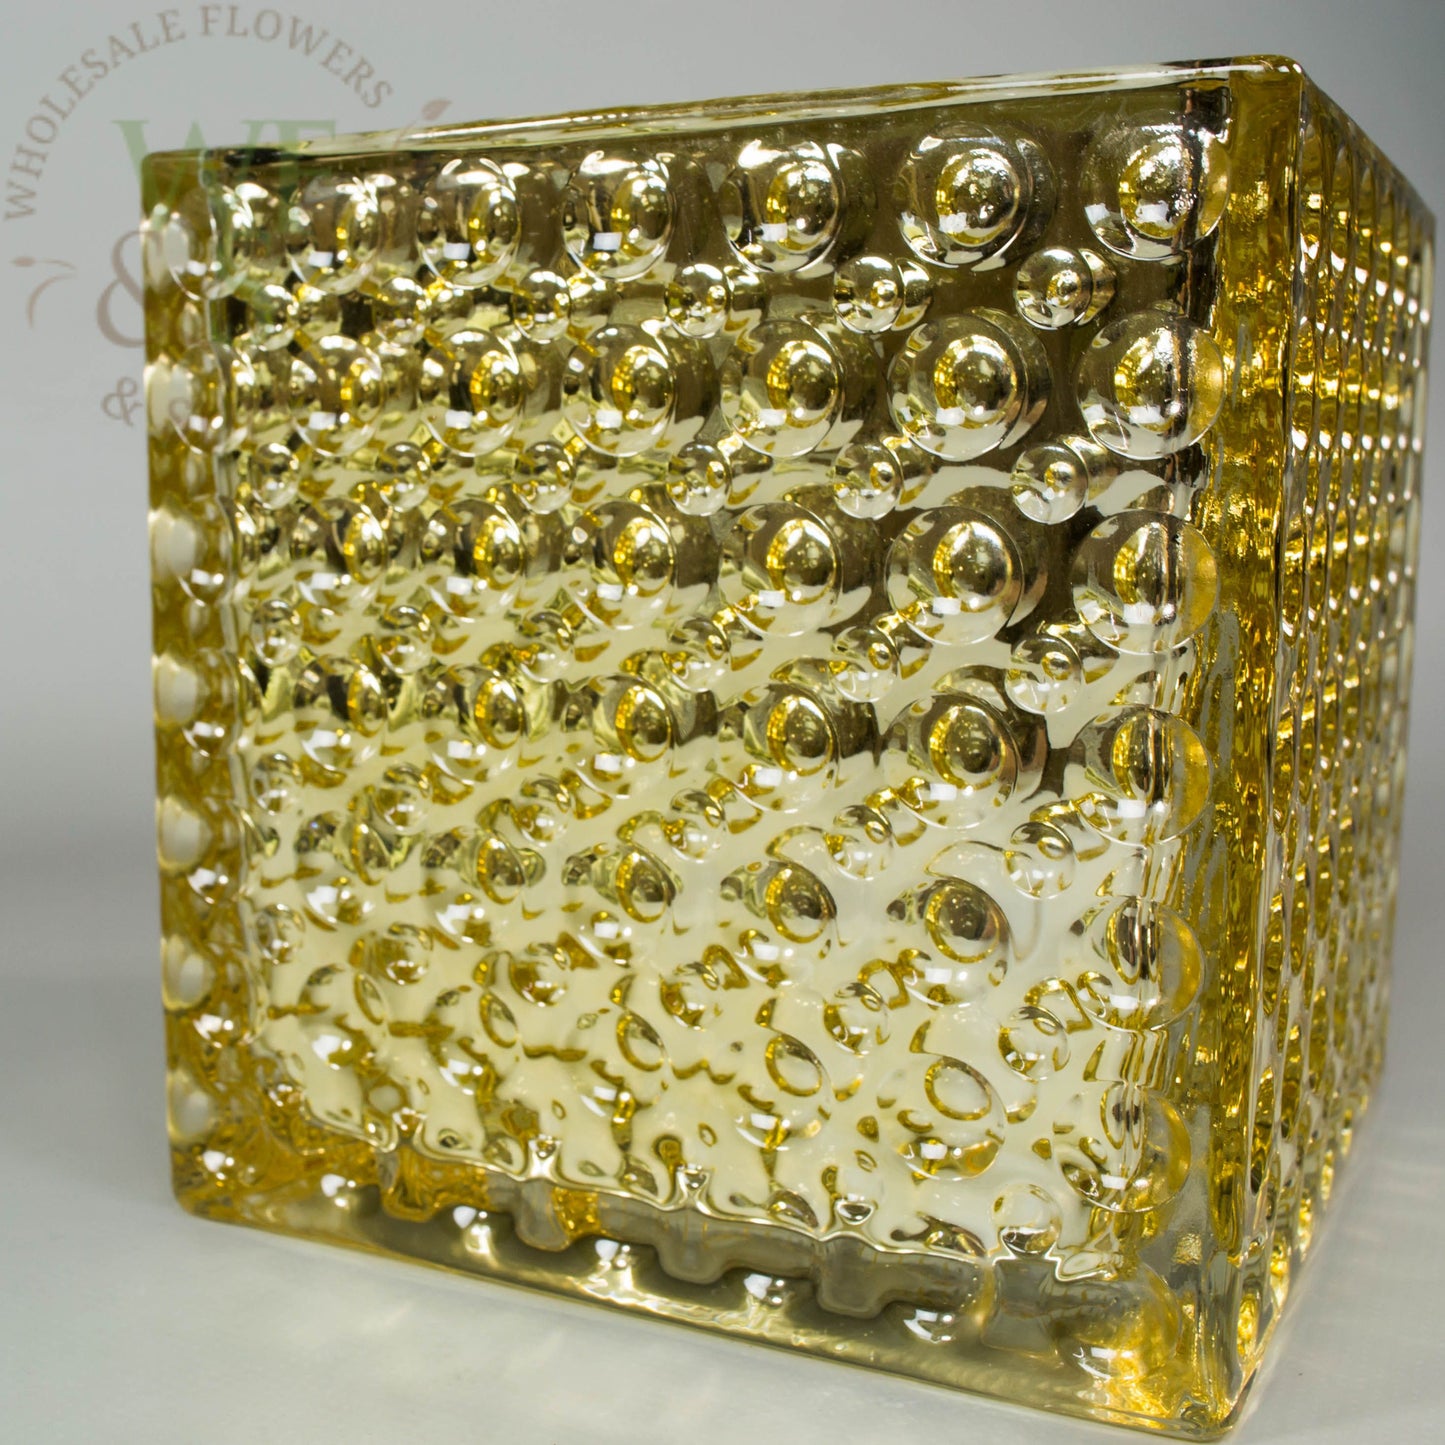 Square Gold Mirrored Glass Cube Vase Dimple Effect 6x6